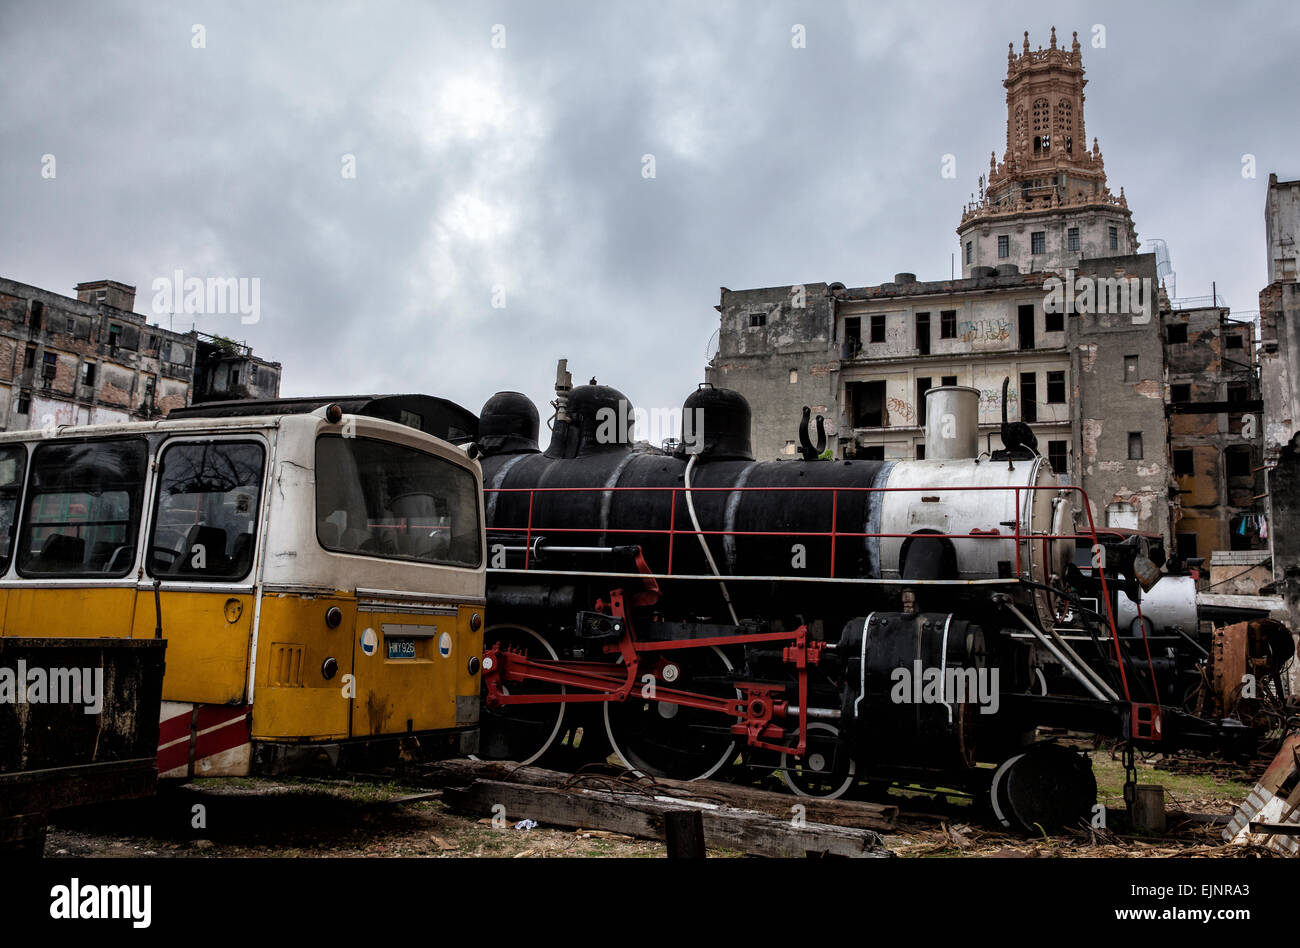 Old steam trains and school buses at a railway yard in central Havana being lovingly restored and repaired to former glory. Stock Photo